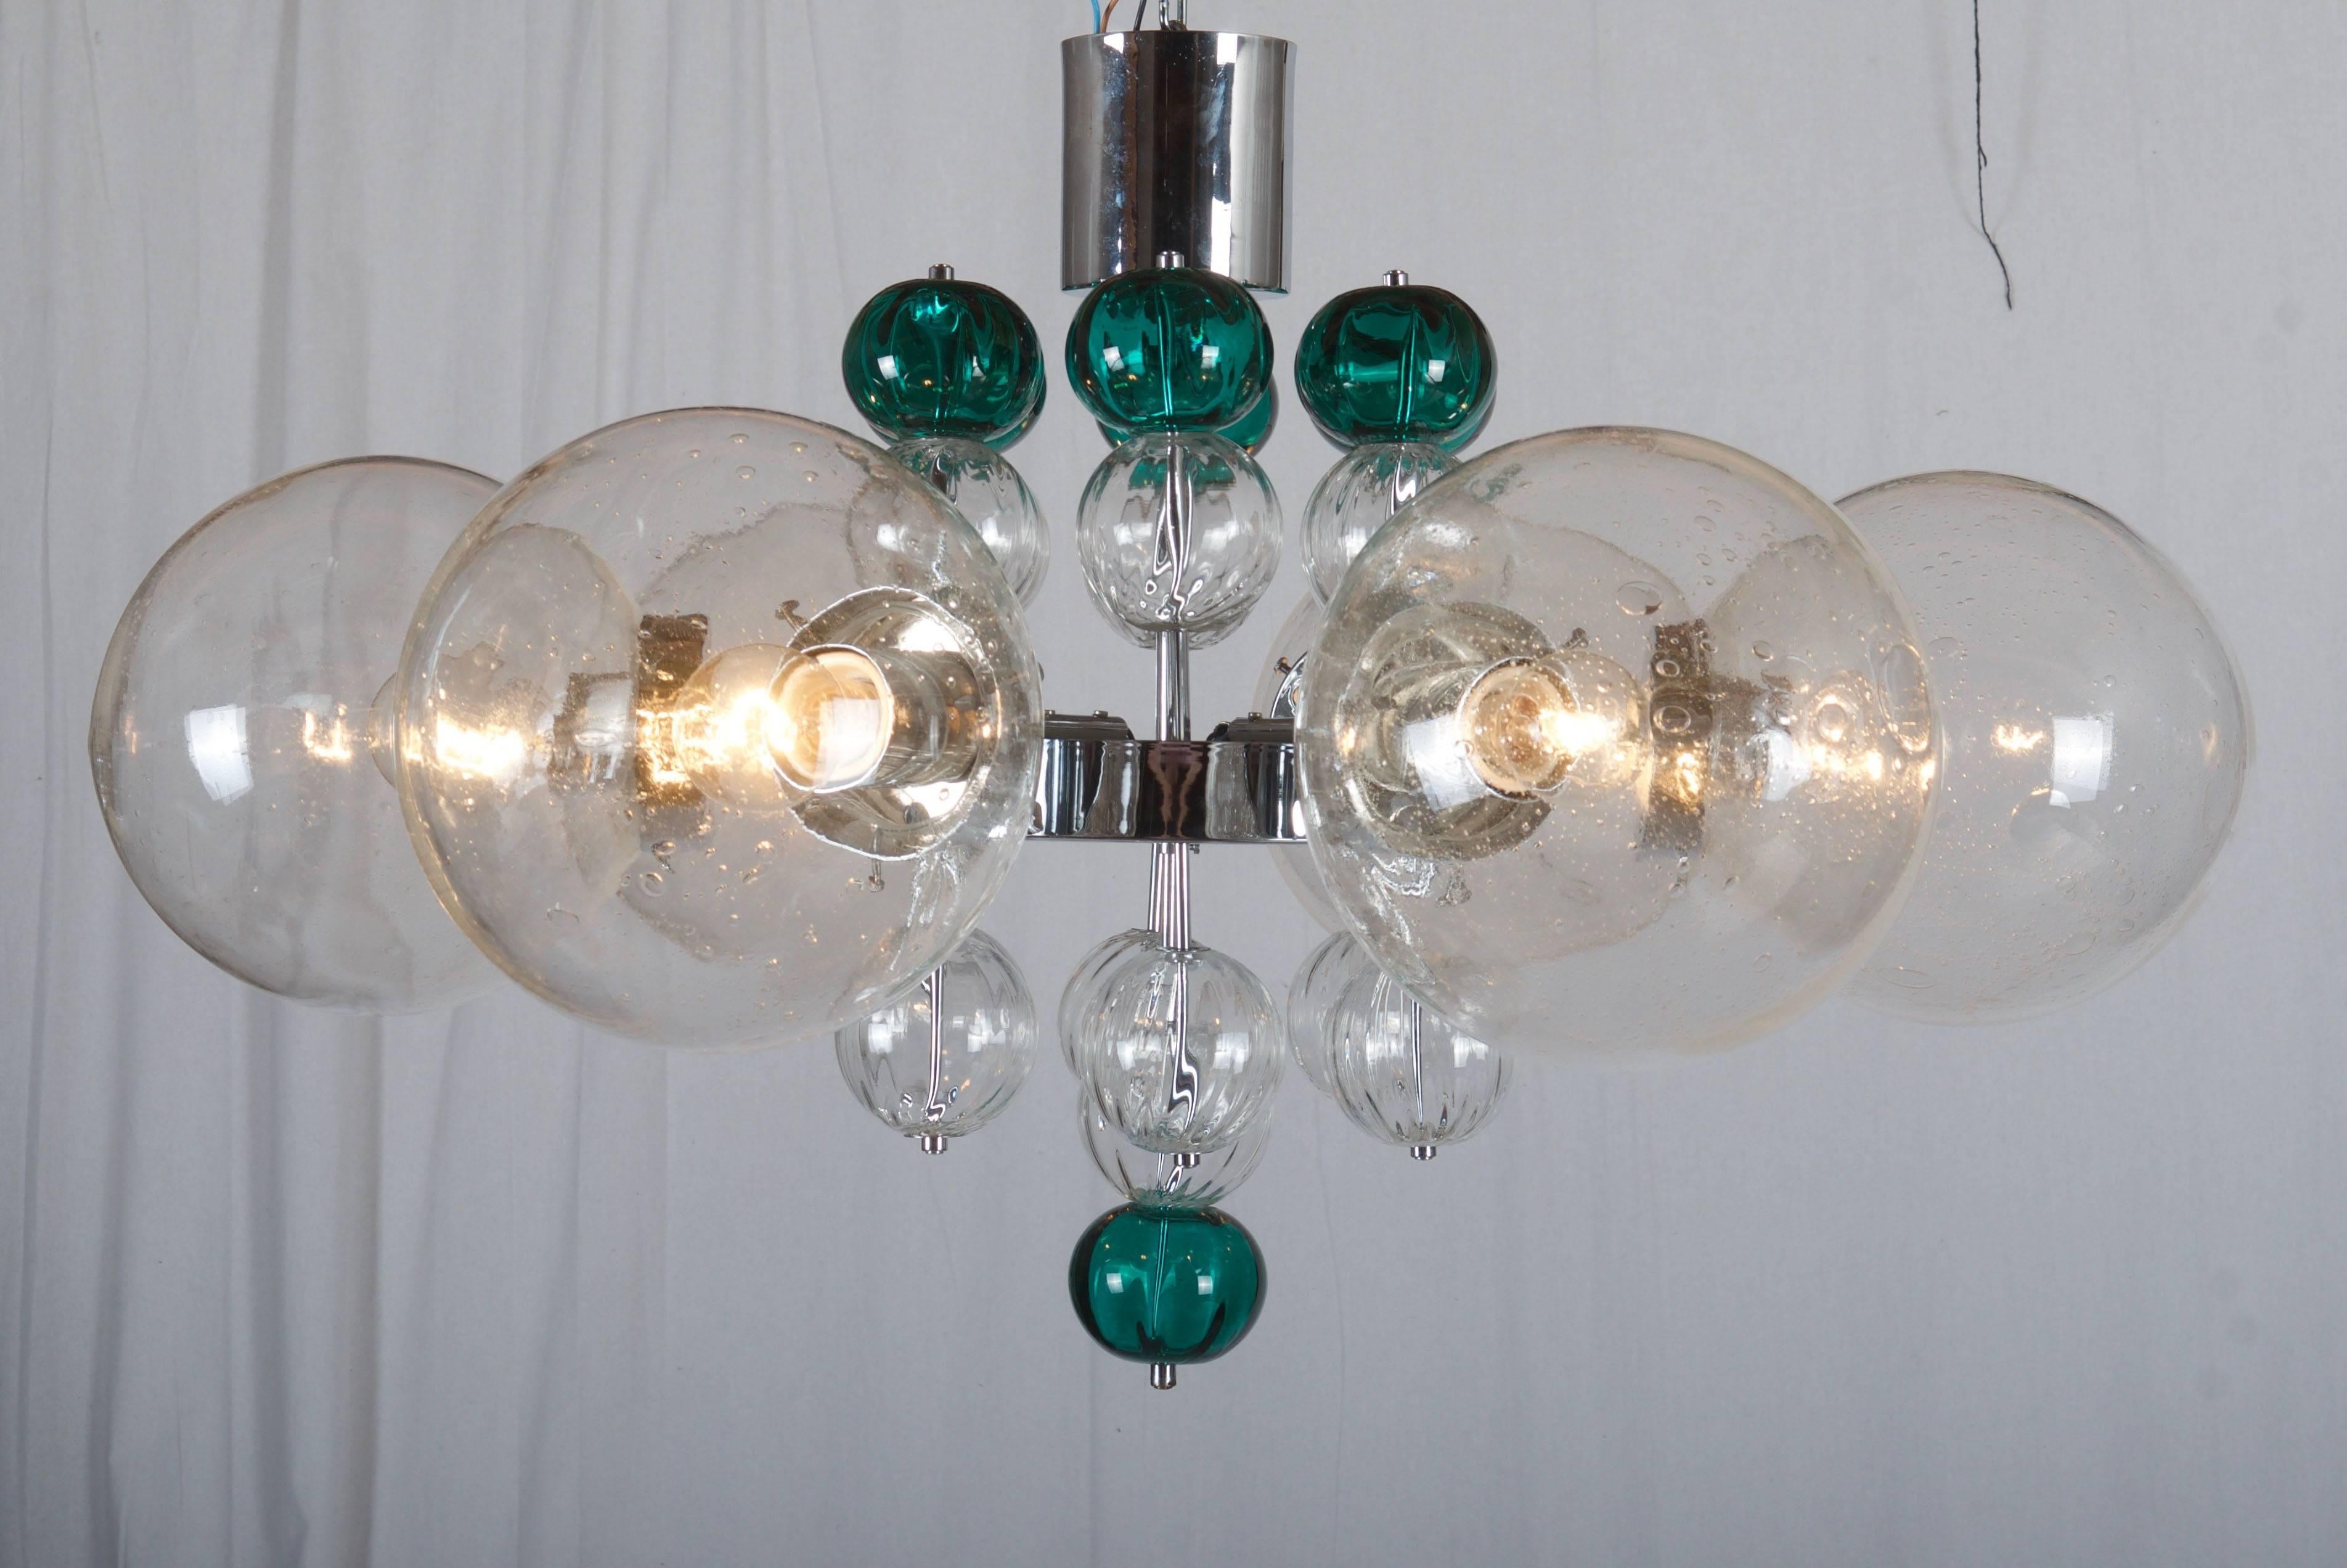 Beautiful large chandelier with brass or chromed frame, six large handblown globes with air inclusions and 20 small handblown glass balls. Fitted with six E27 up to 100W each porcelain sockets.
This chandelier was made by Kamenicky Senov in the